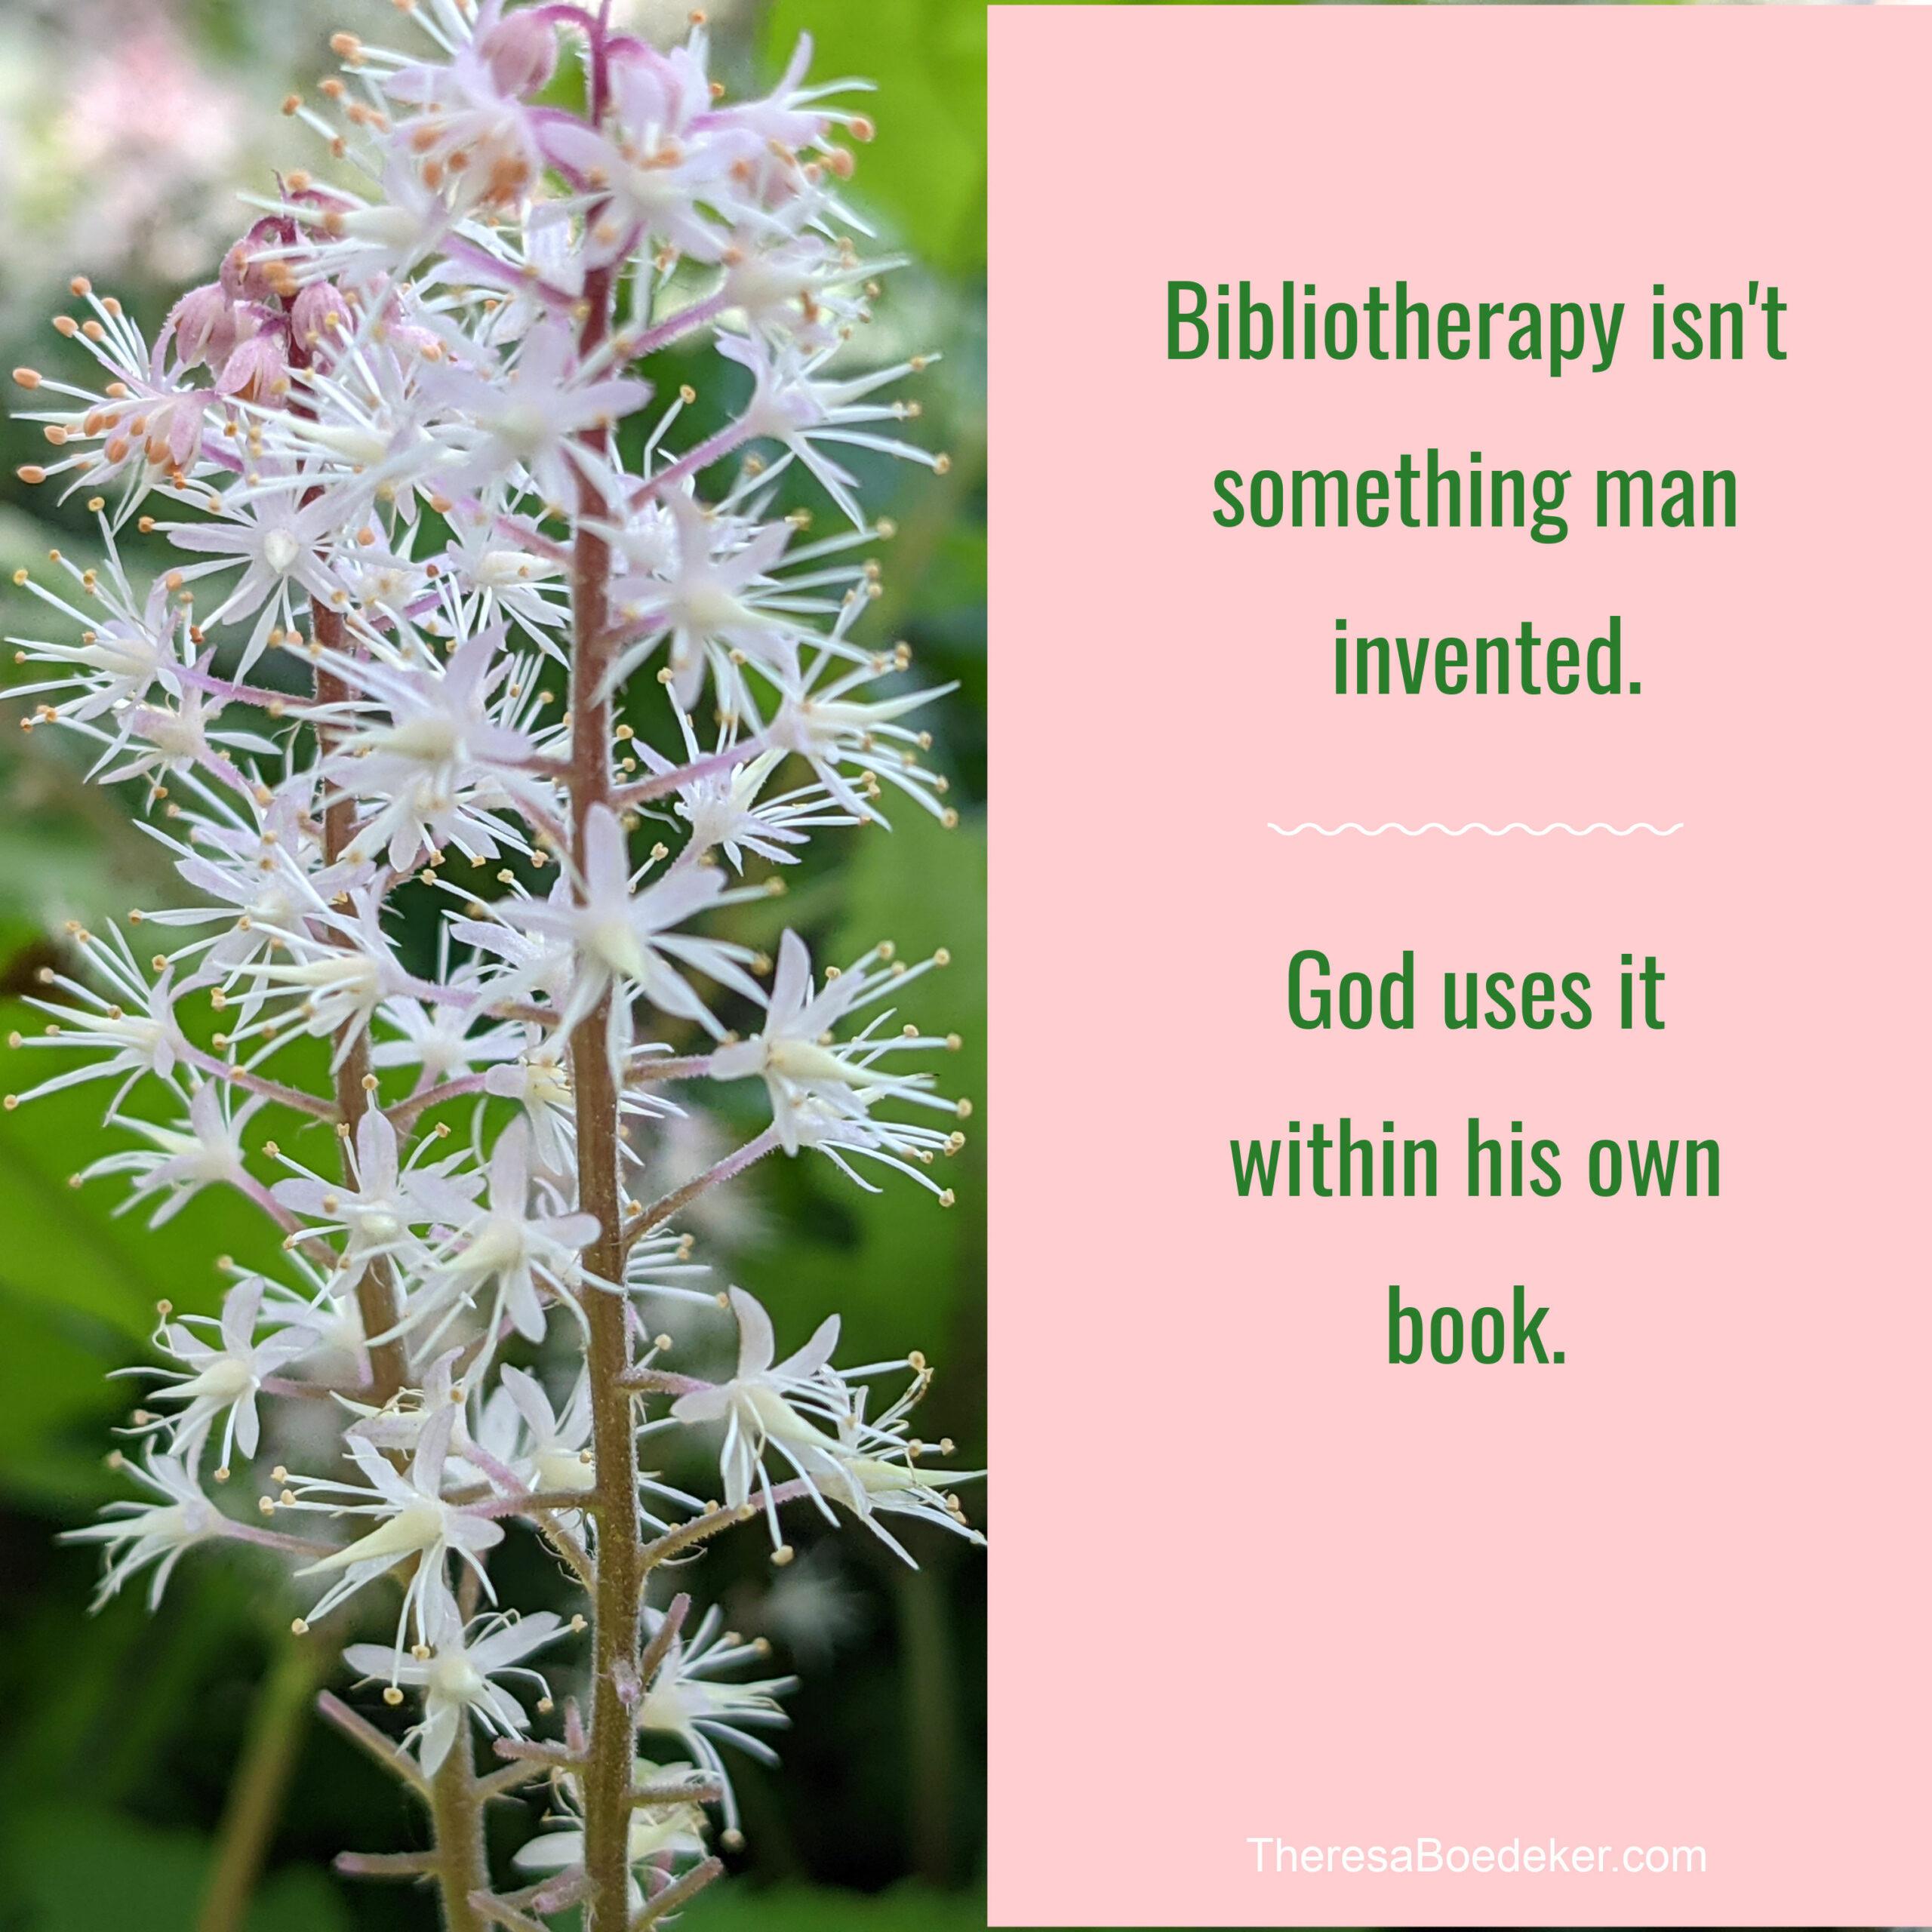 Bibliotherapy is something you may already be experiencing but didn't know you were.